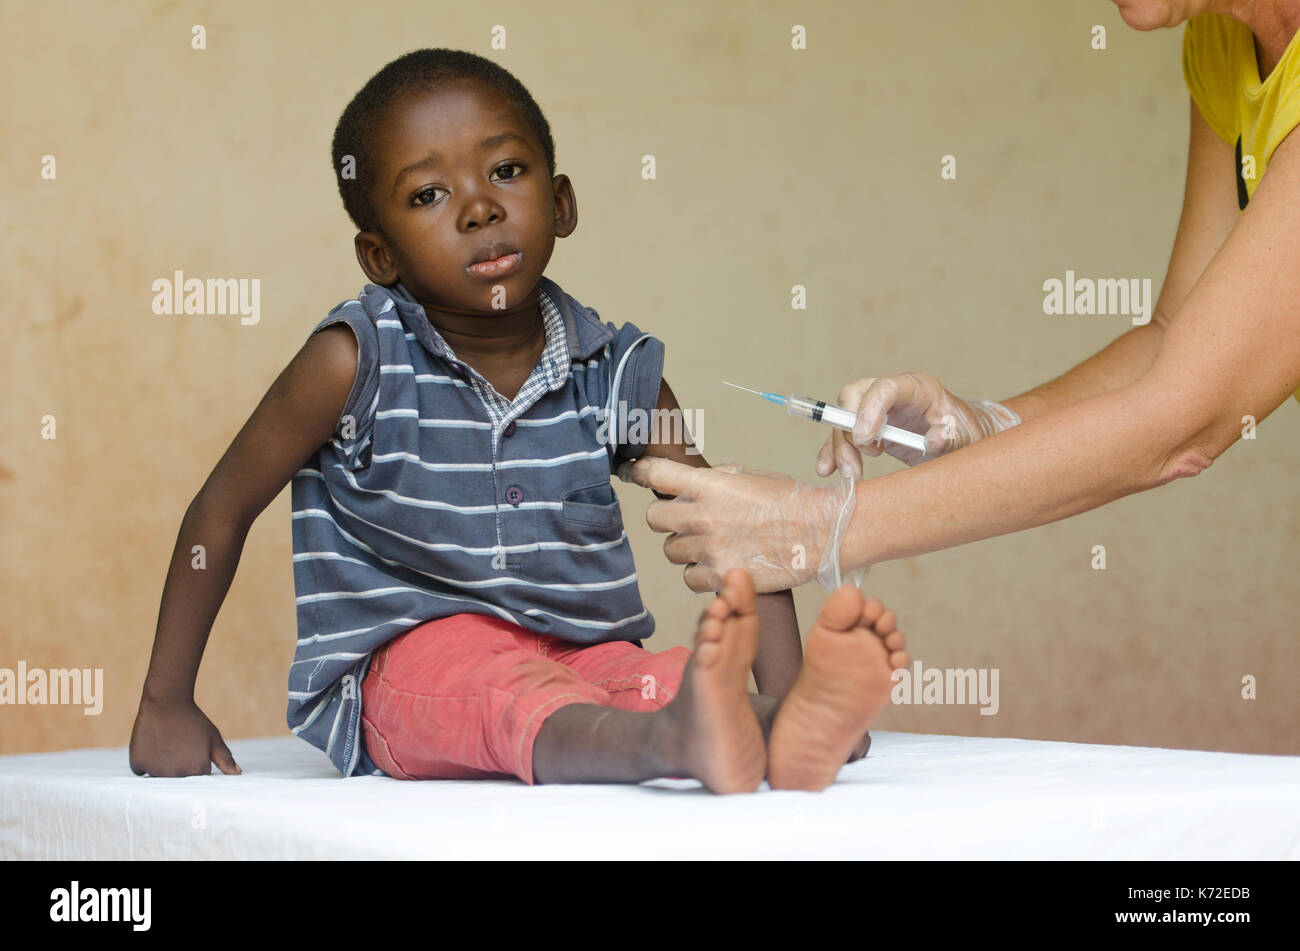 Sad African boy ready to get an injection from a volunteer nurse in Bamako, Mali Stock Photo